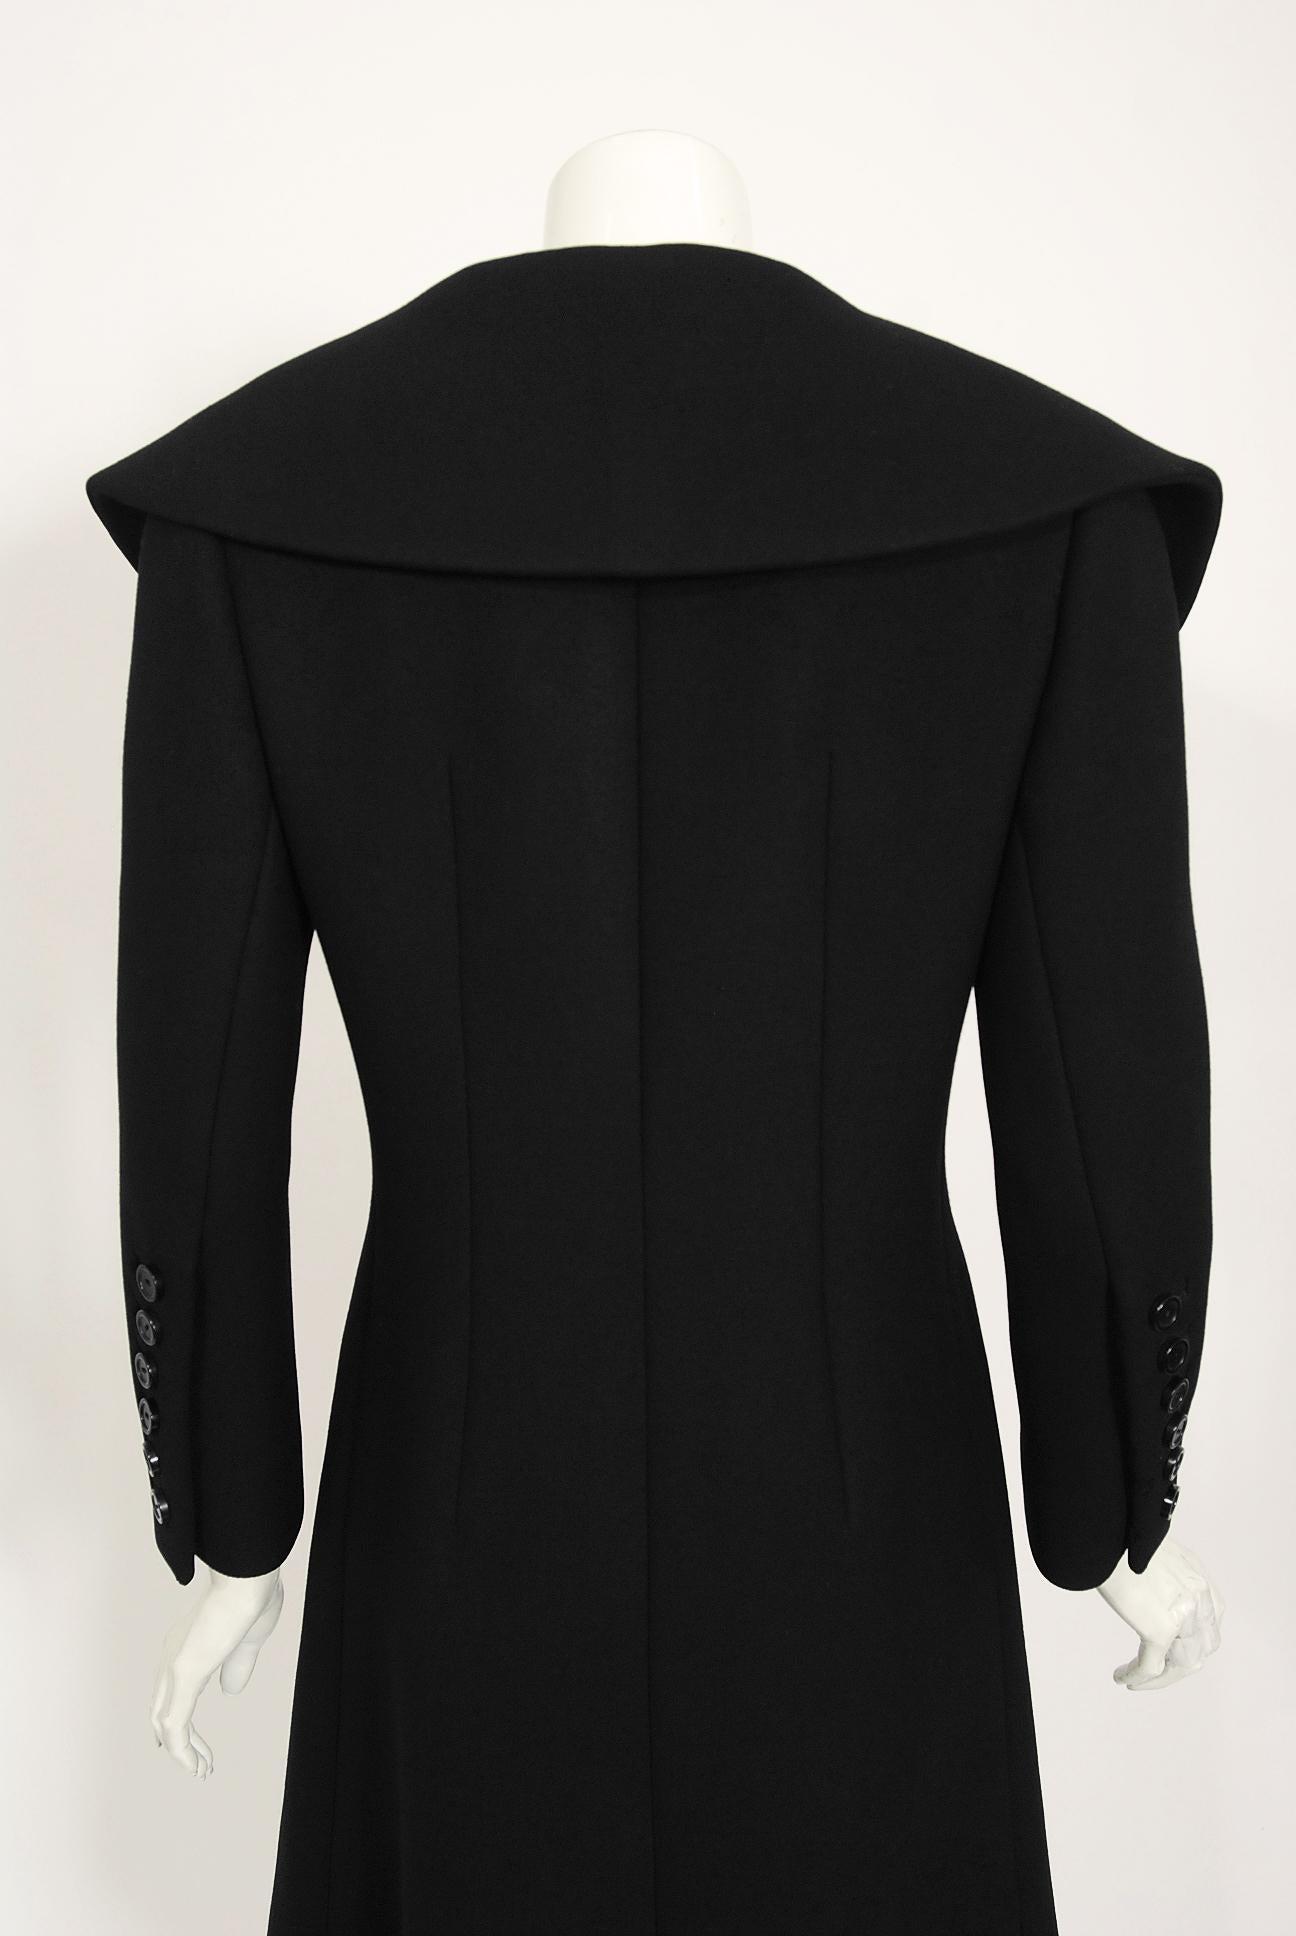 Vintage 1968 Norman Norell Black Wool Over-Sized Collar Double Breasted Mod Coat 6